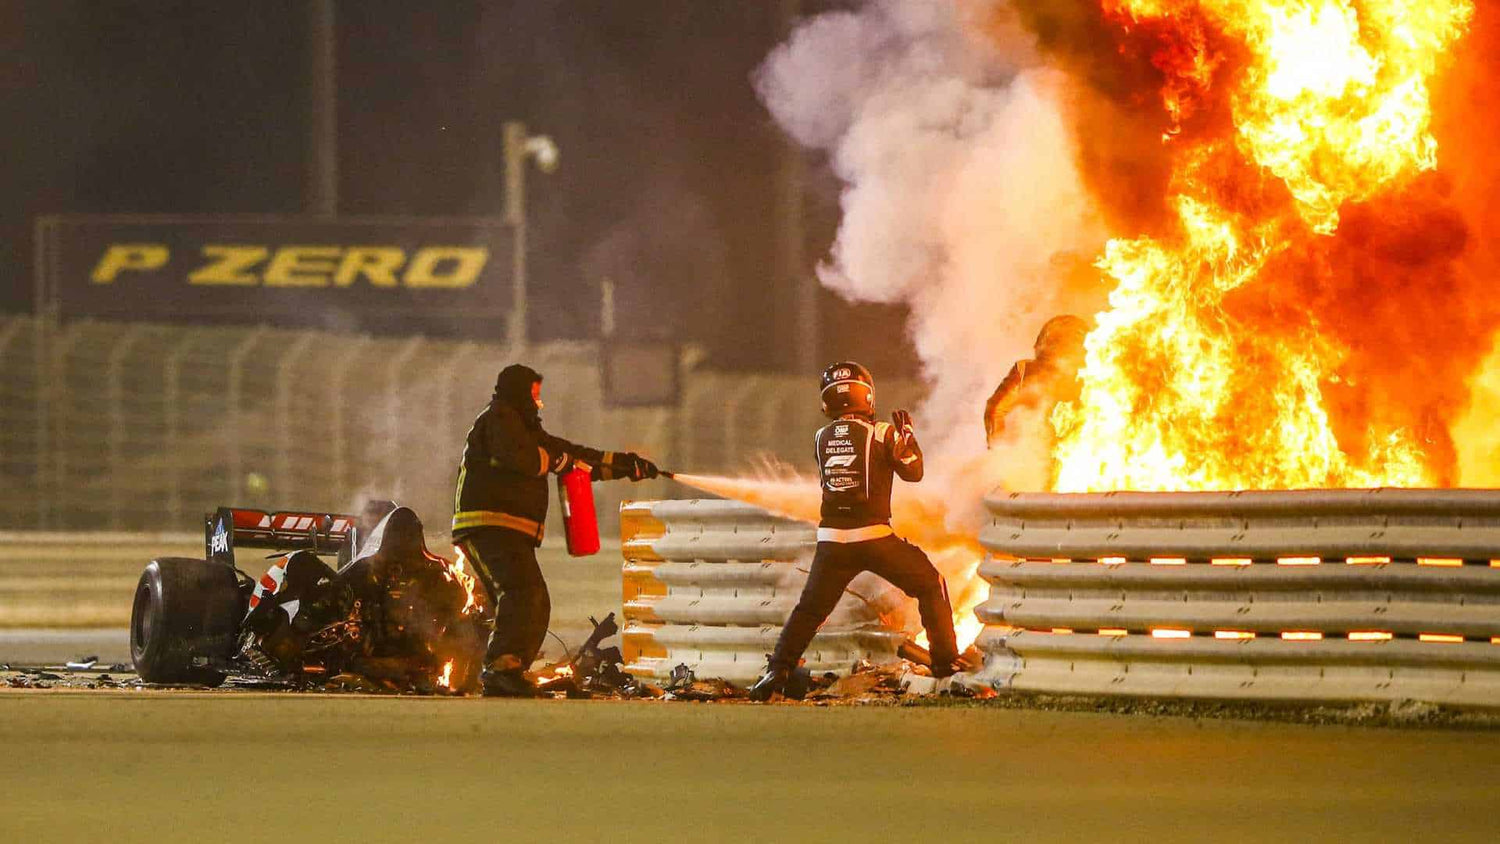 Grosjean's Fiery Escape – How Did He Survived the Crash?